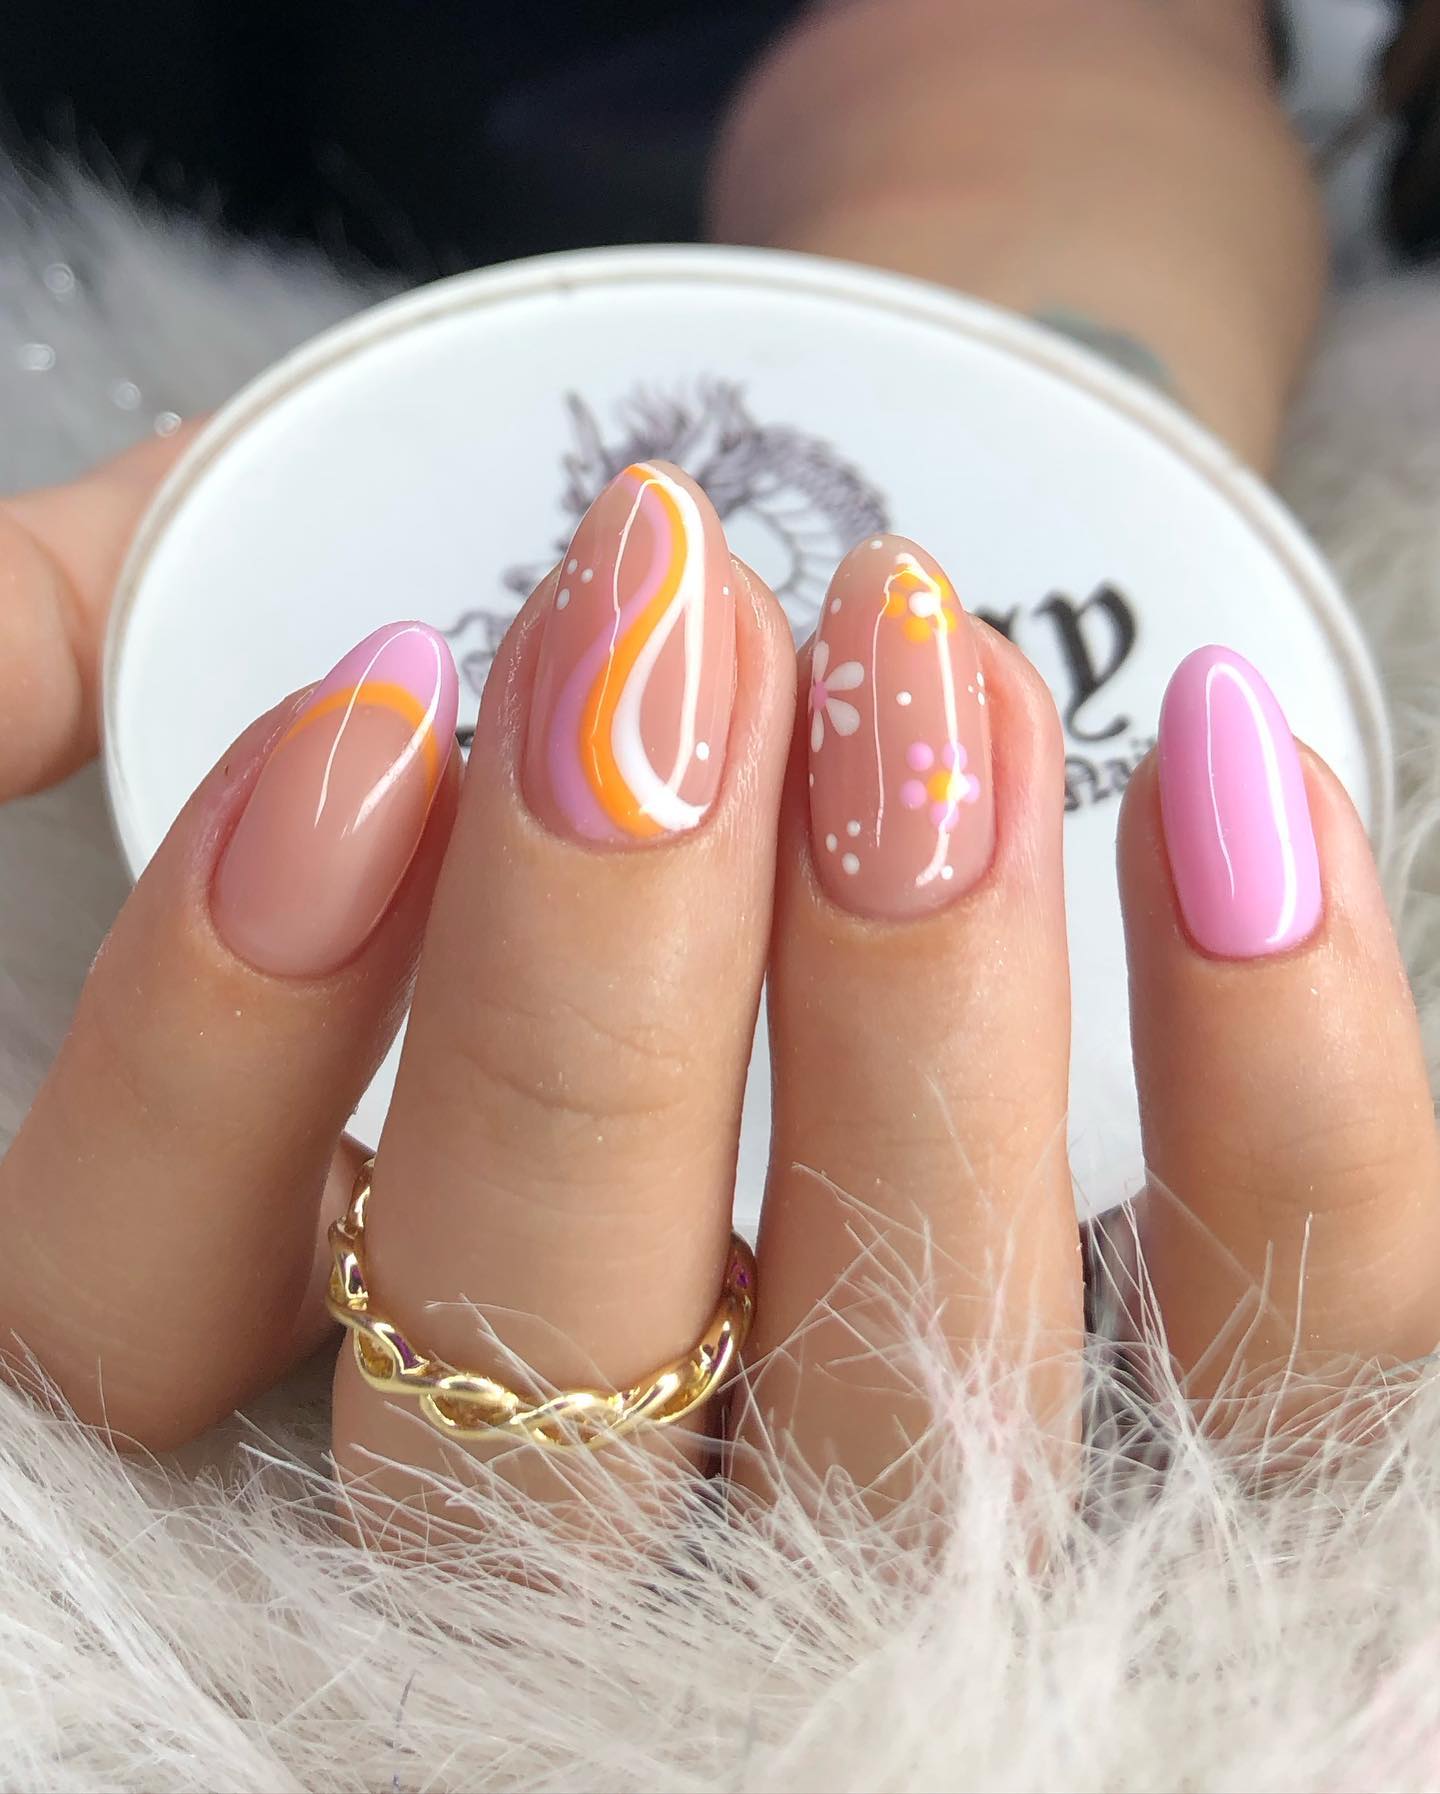 100+ Short Nail Designs You’ll Want To Try This Year images 93